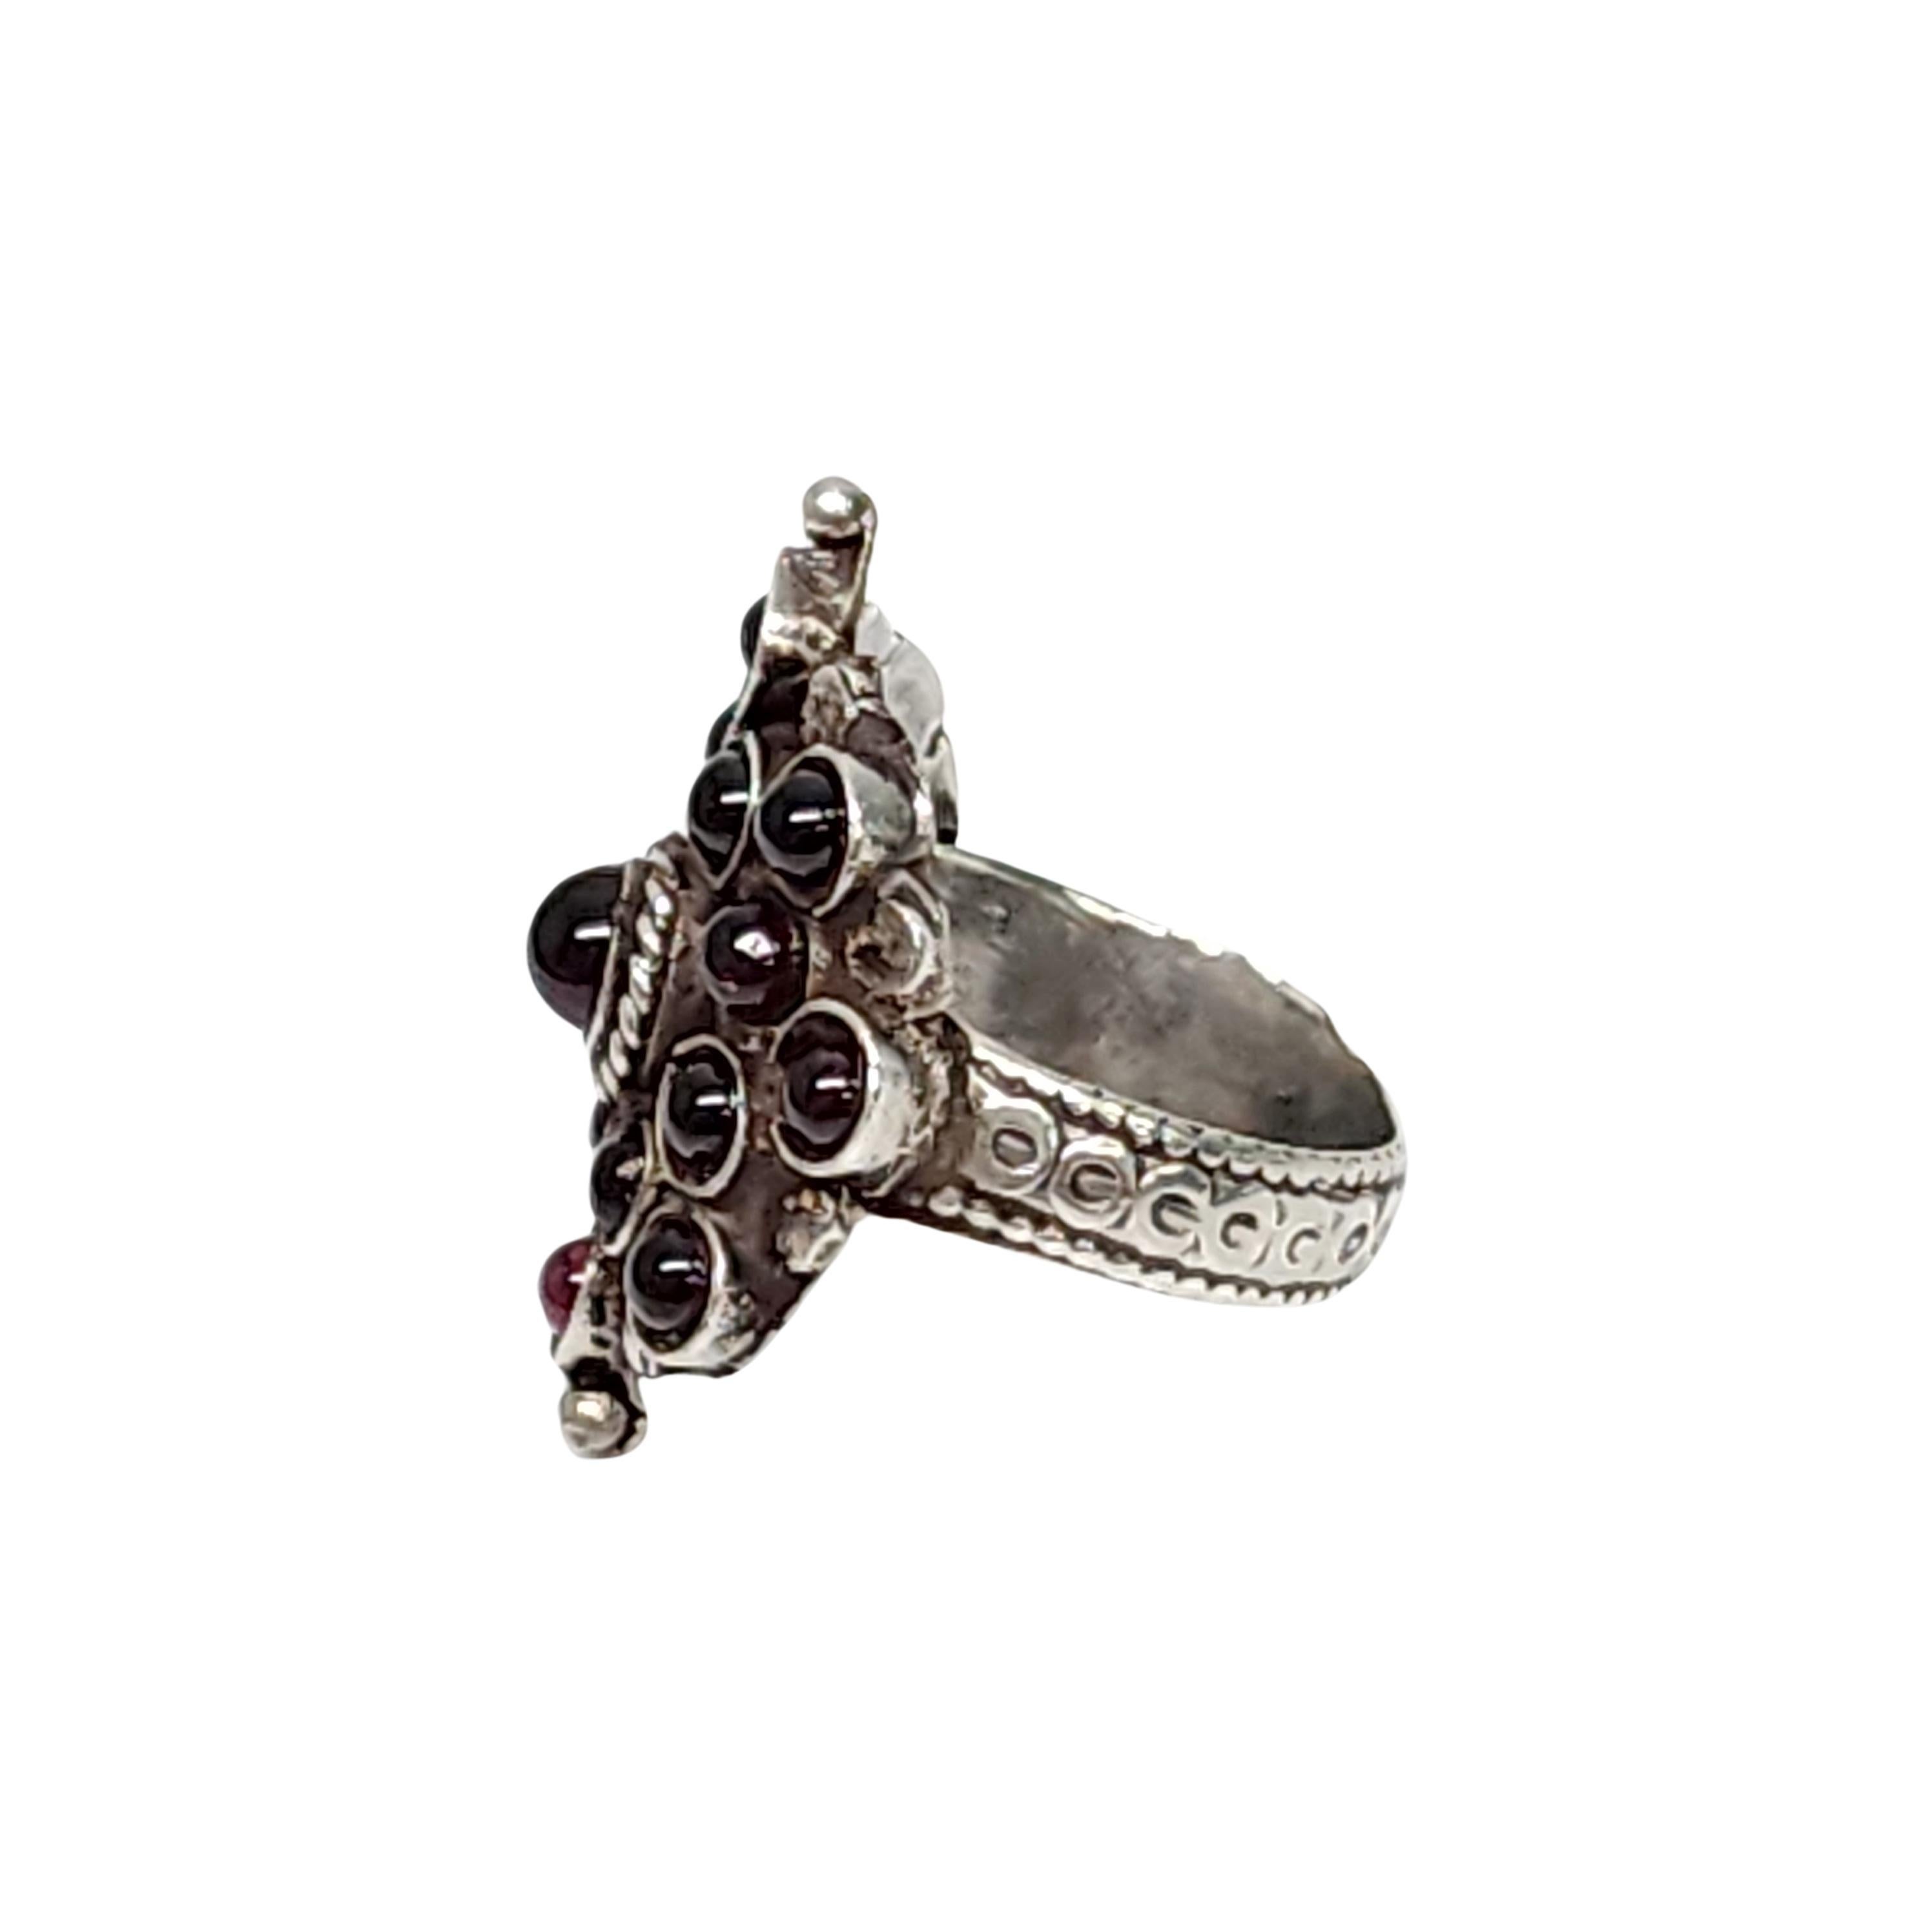 Sterling silver ruby cabochon cluster ring.

Size 6 1/2

Round bezel set ruby cabochon stones surround one slightly larger center stone with rope edge accent. Ornate band.

Measures approx 1 1/8